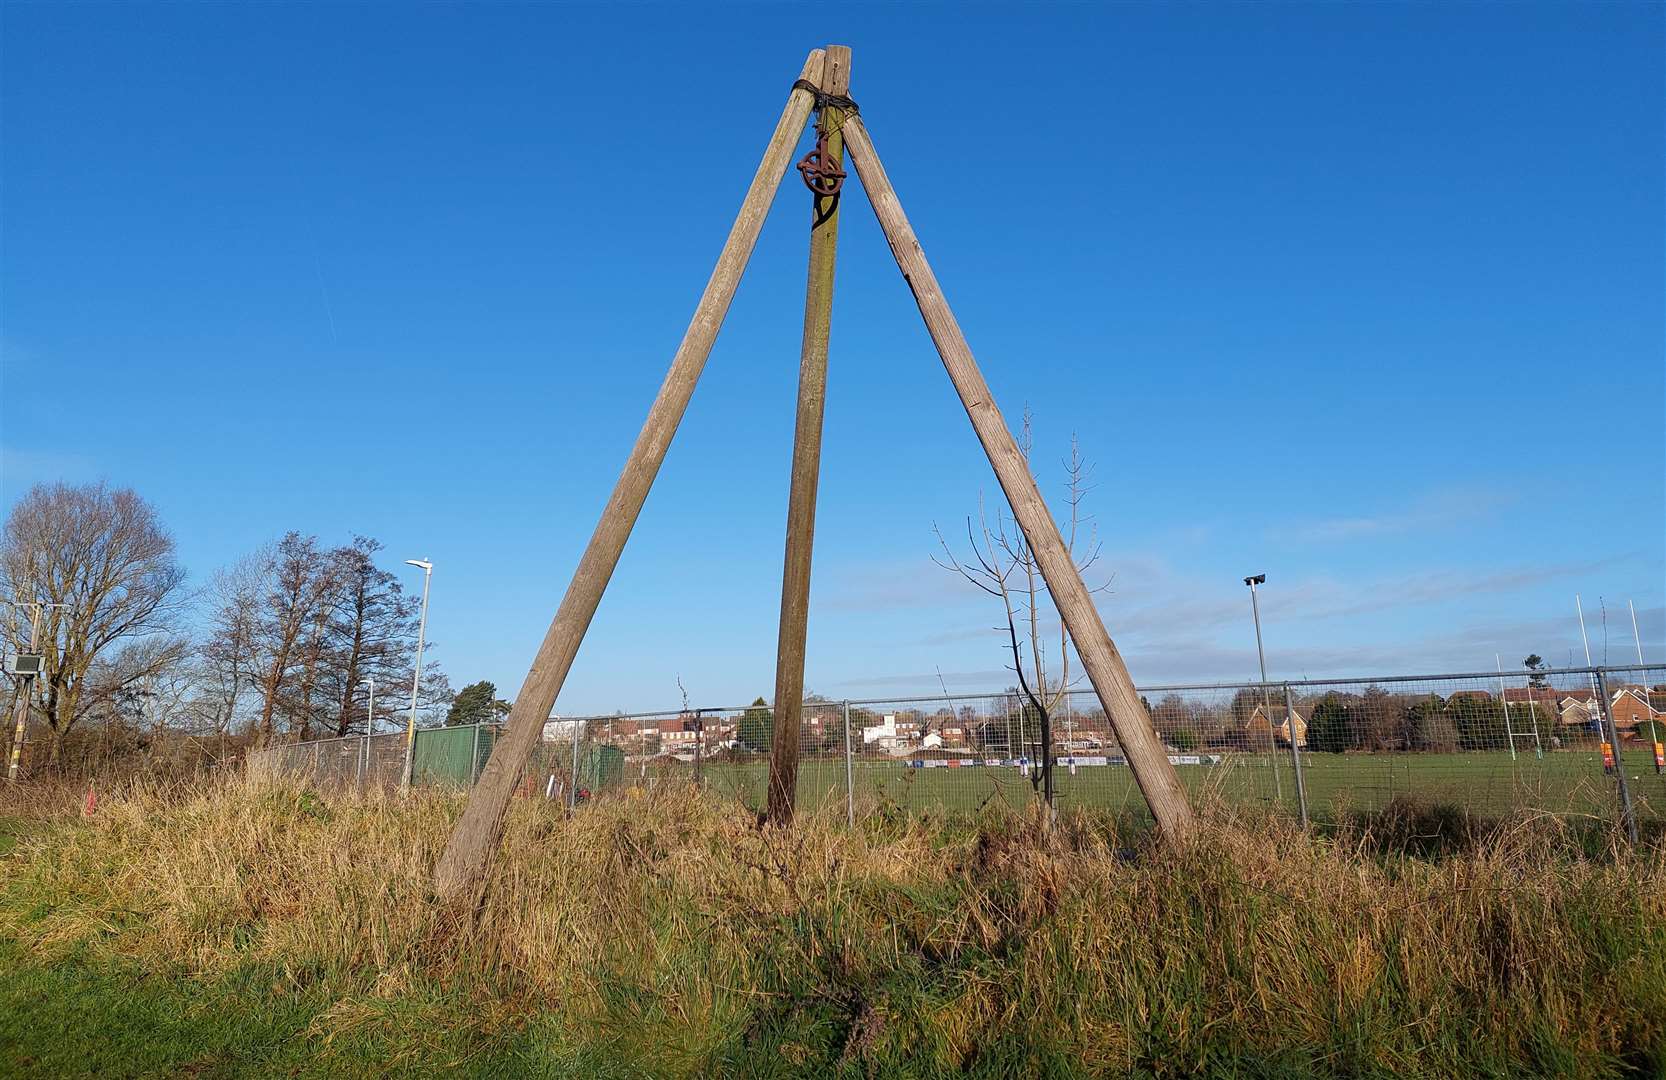 The wigwam-style structure is just off a footpath next to Ashford Rugby Club in Kennington